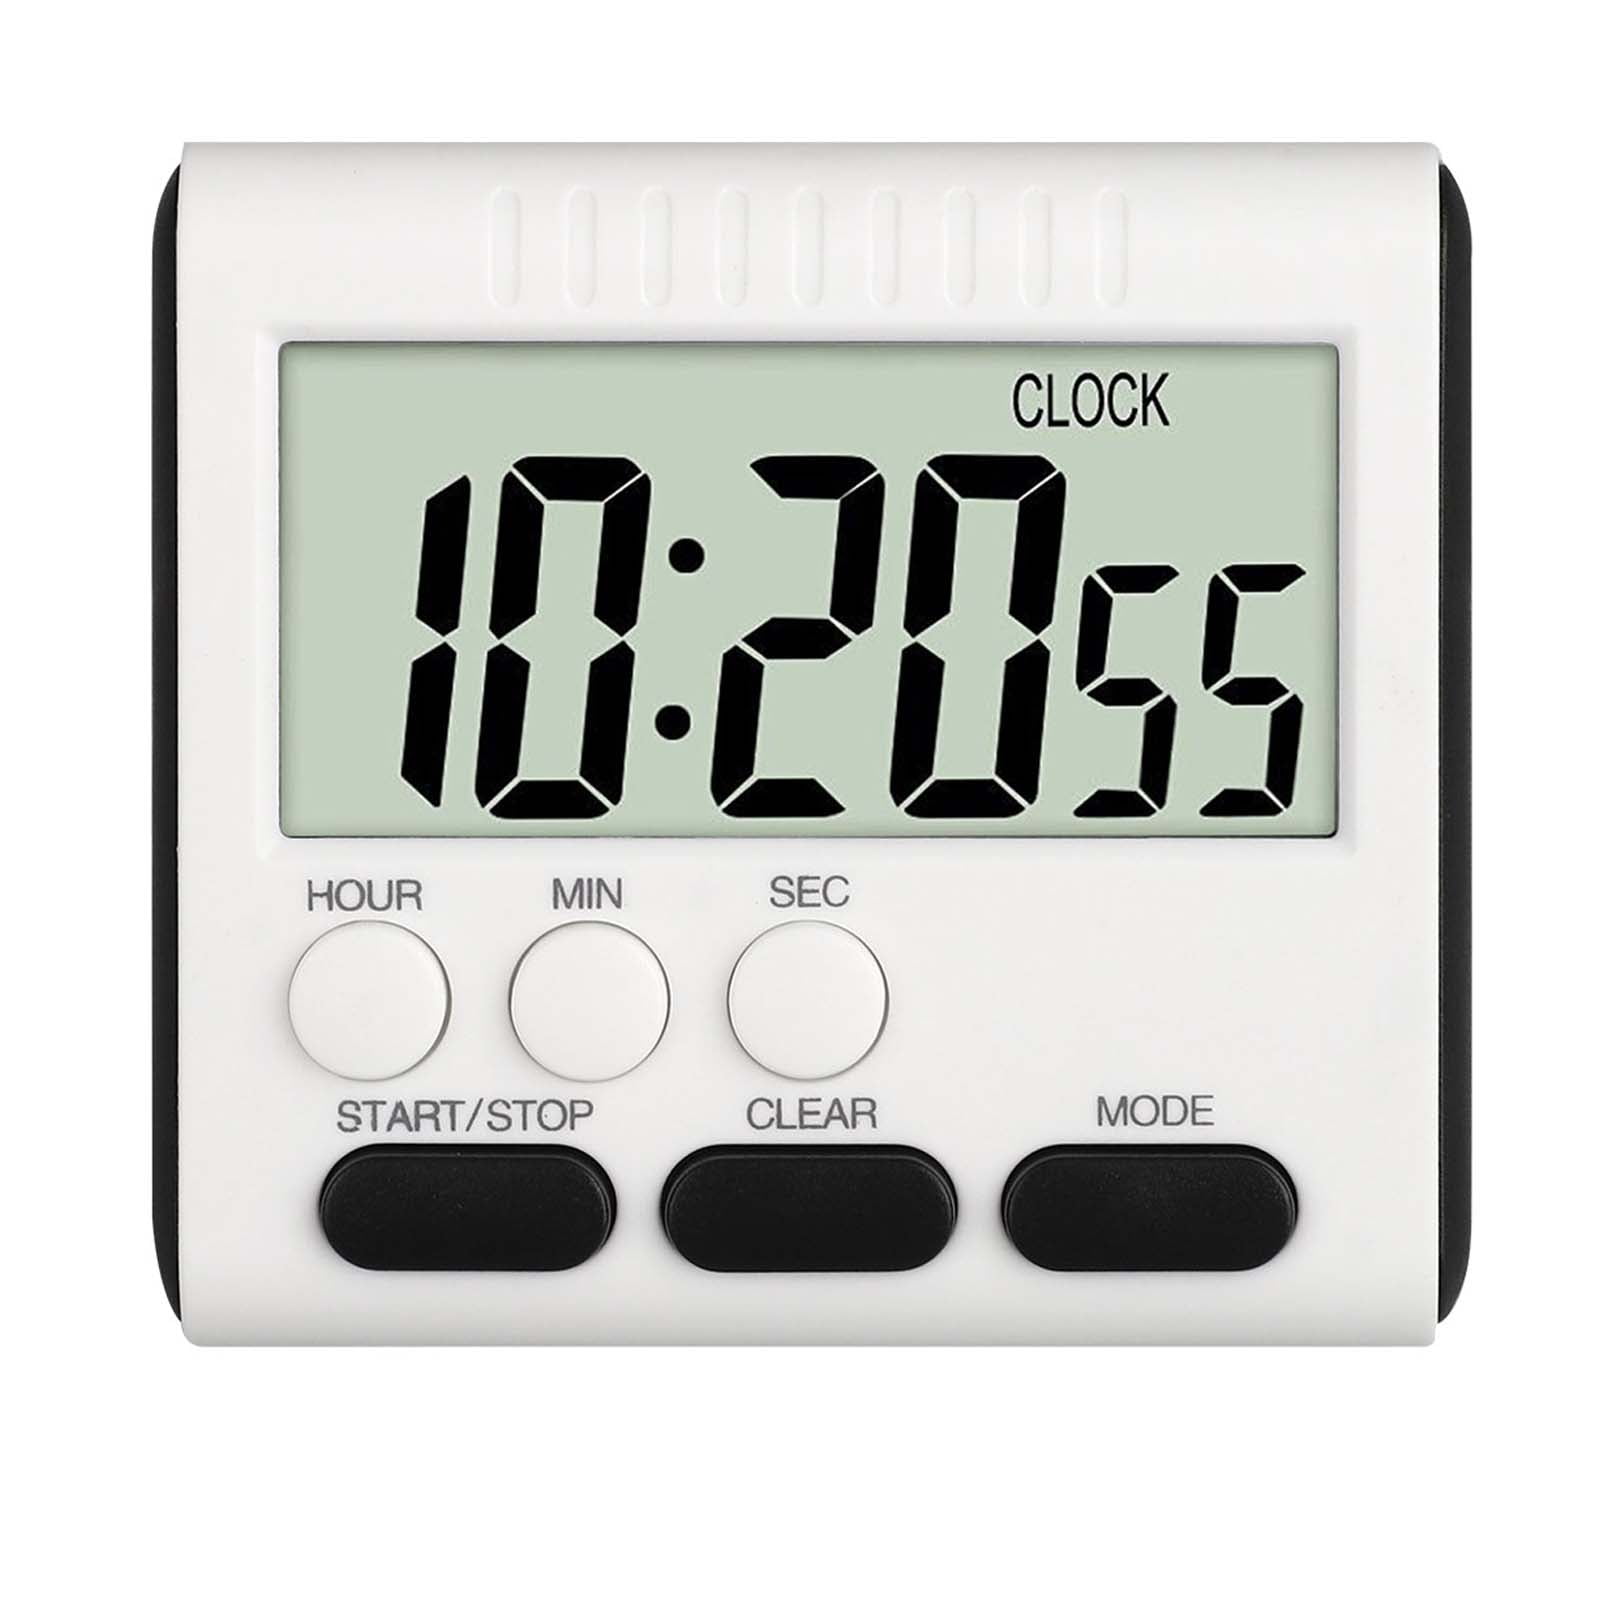 LCD Digital Ultra-thin Kitchen Cooking Timer Count-Down Magnetic Alarm Up F1X1